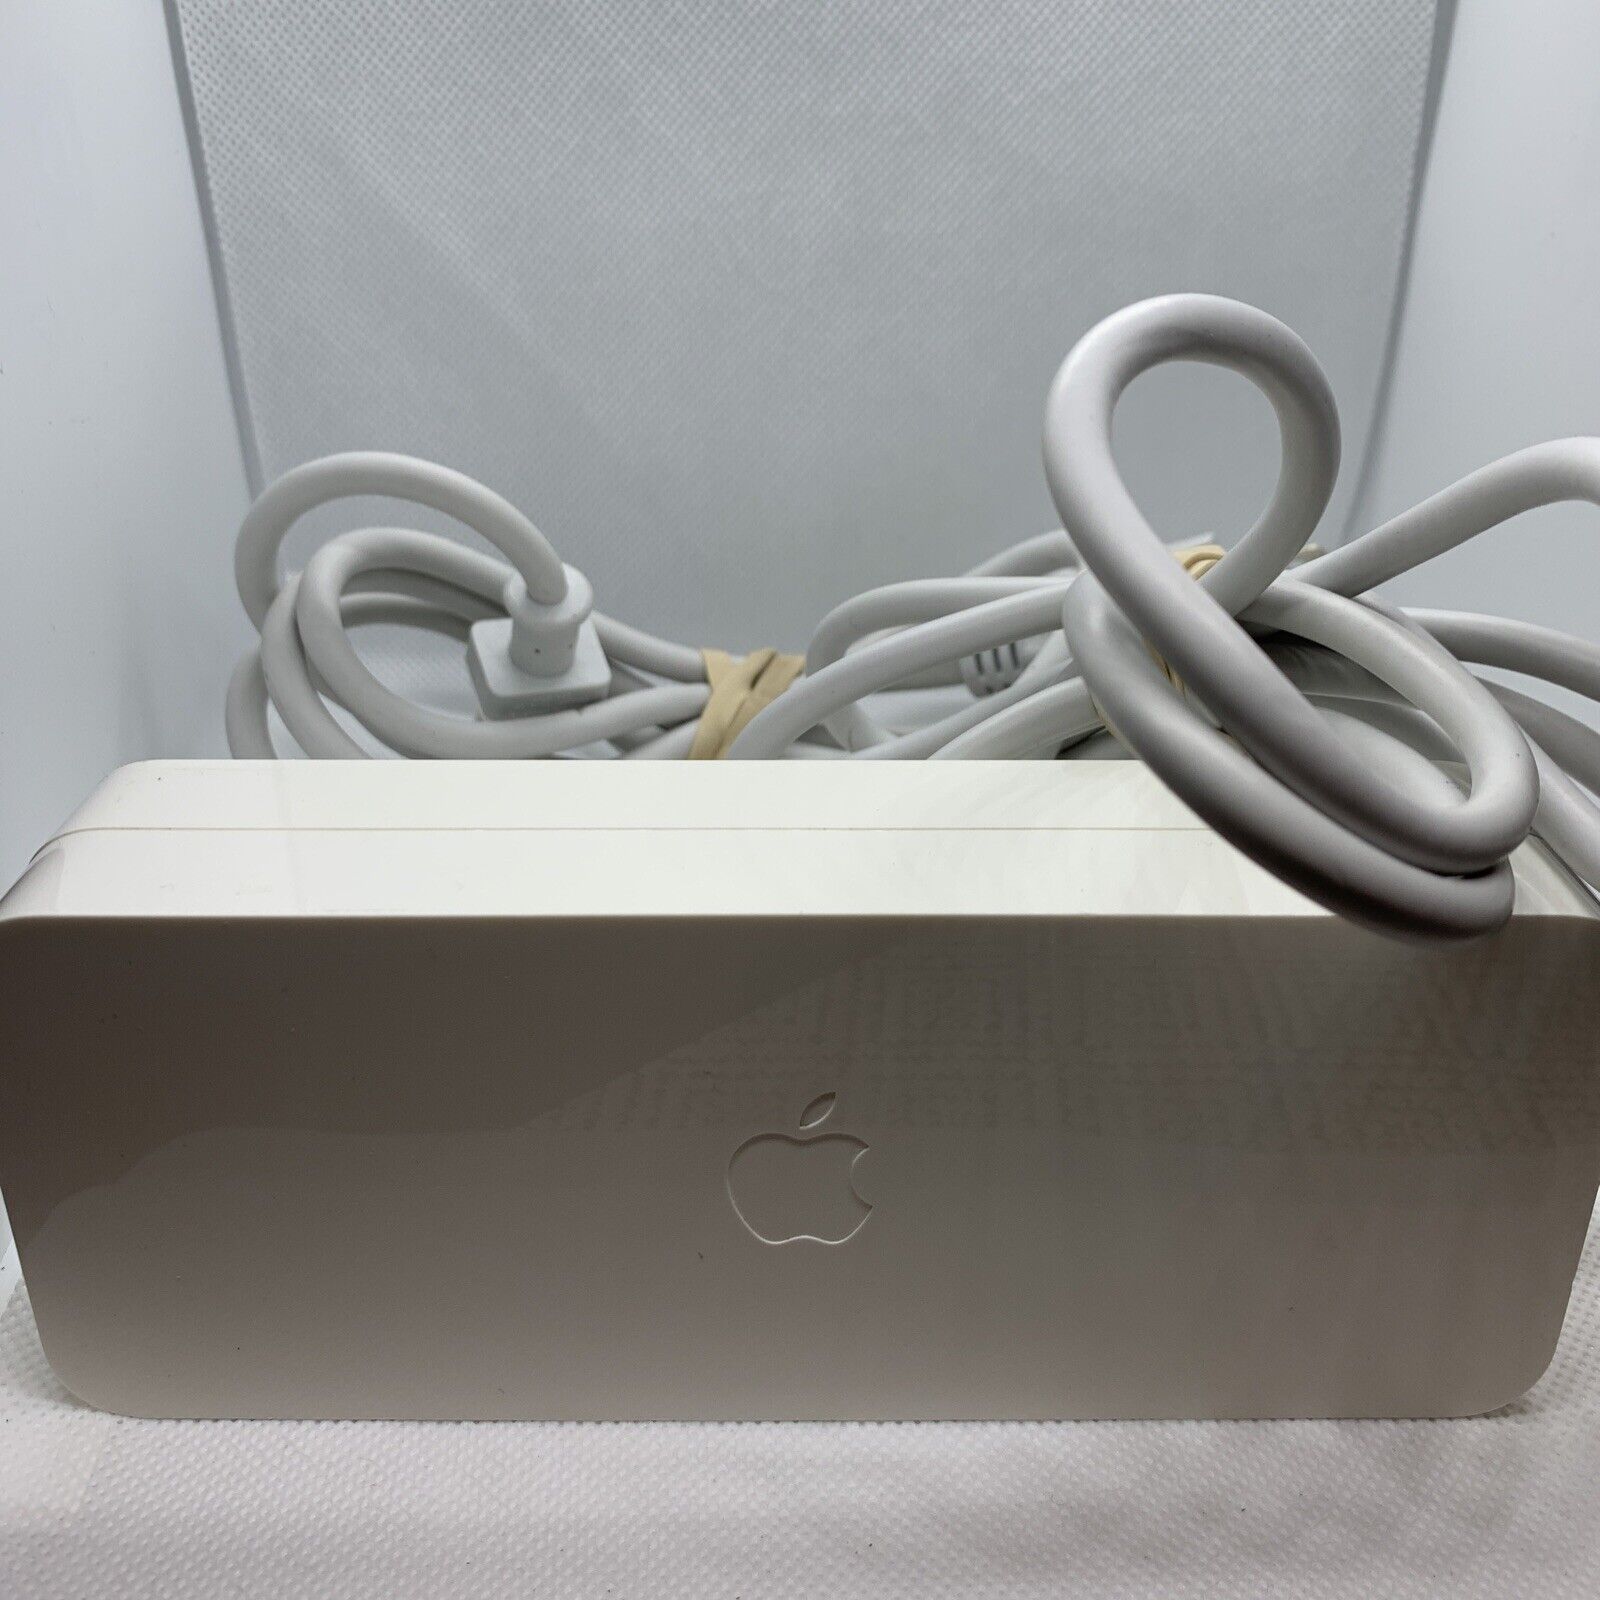 Official Genuine Authentic Apple Mac mini 110W Power Adapter Supply Cable A1188 